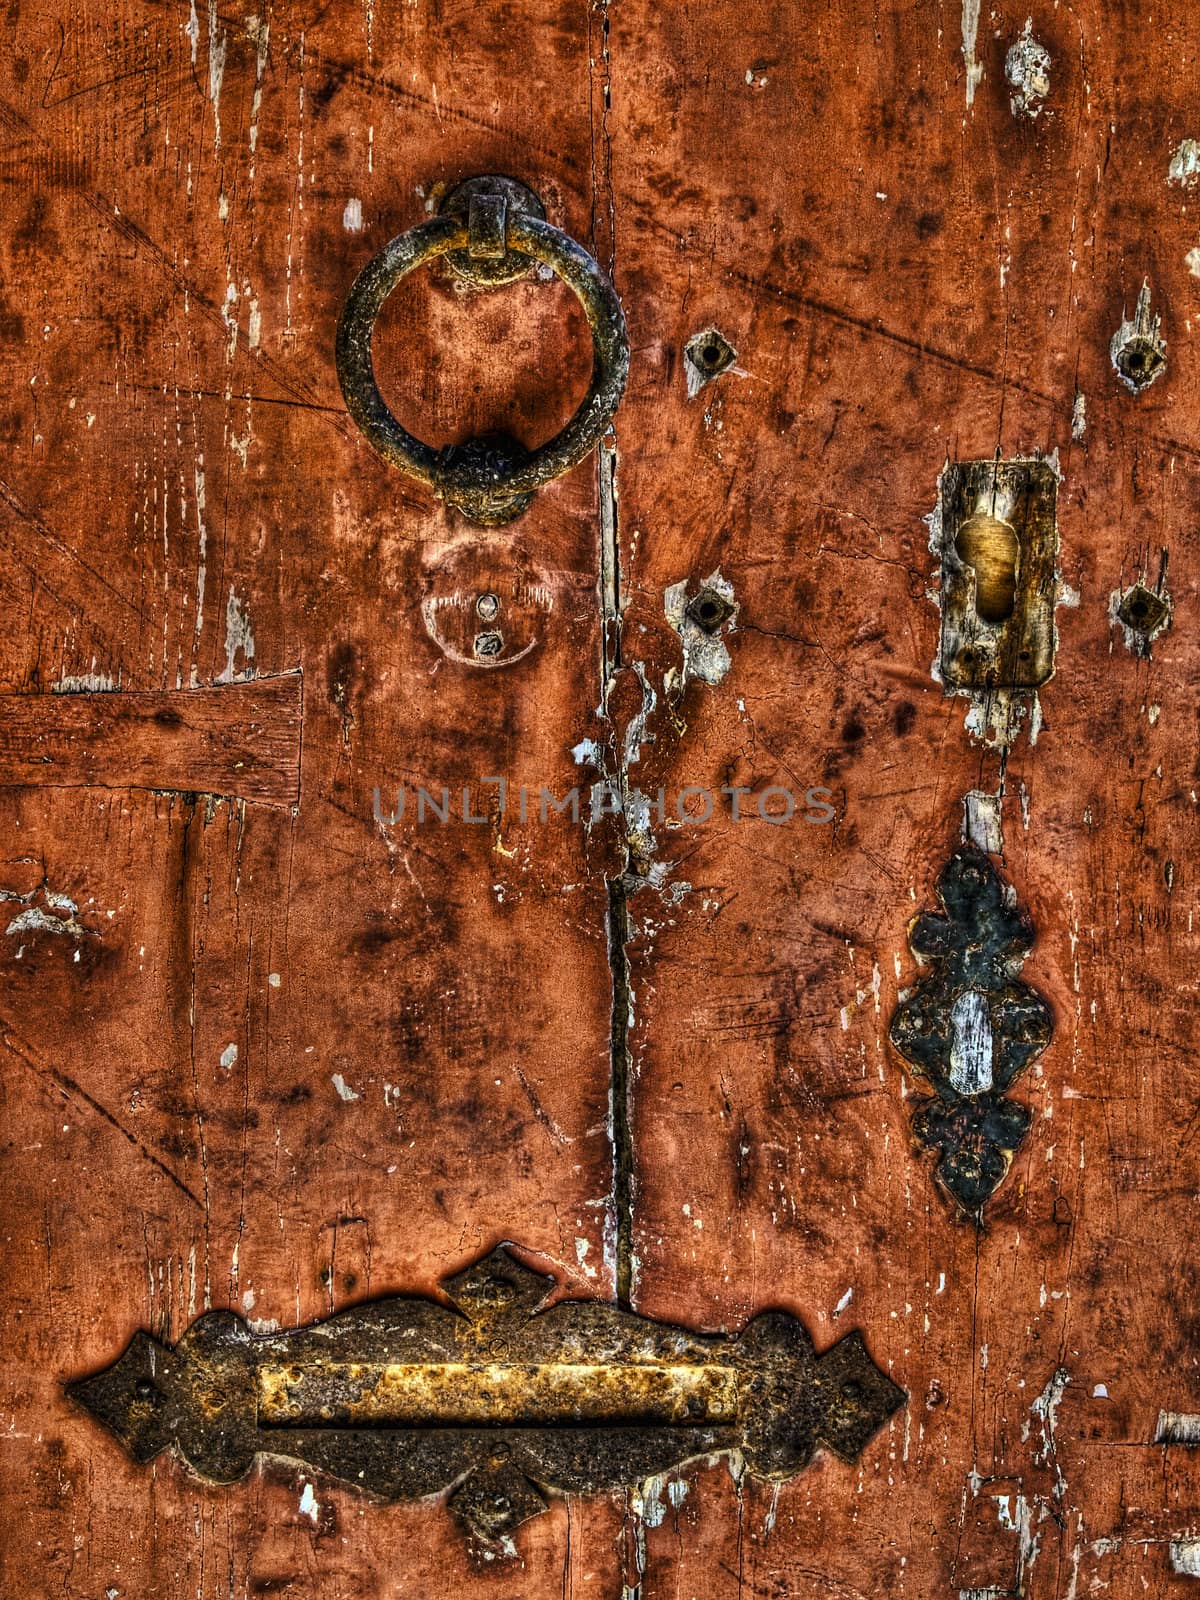 Detailed HDR image showing texture and detail of an old medieval door